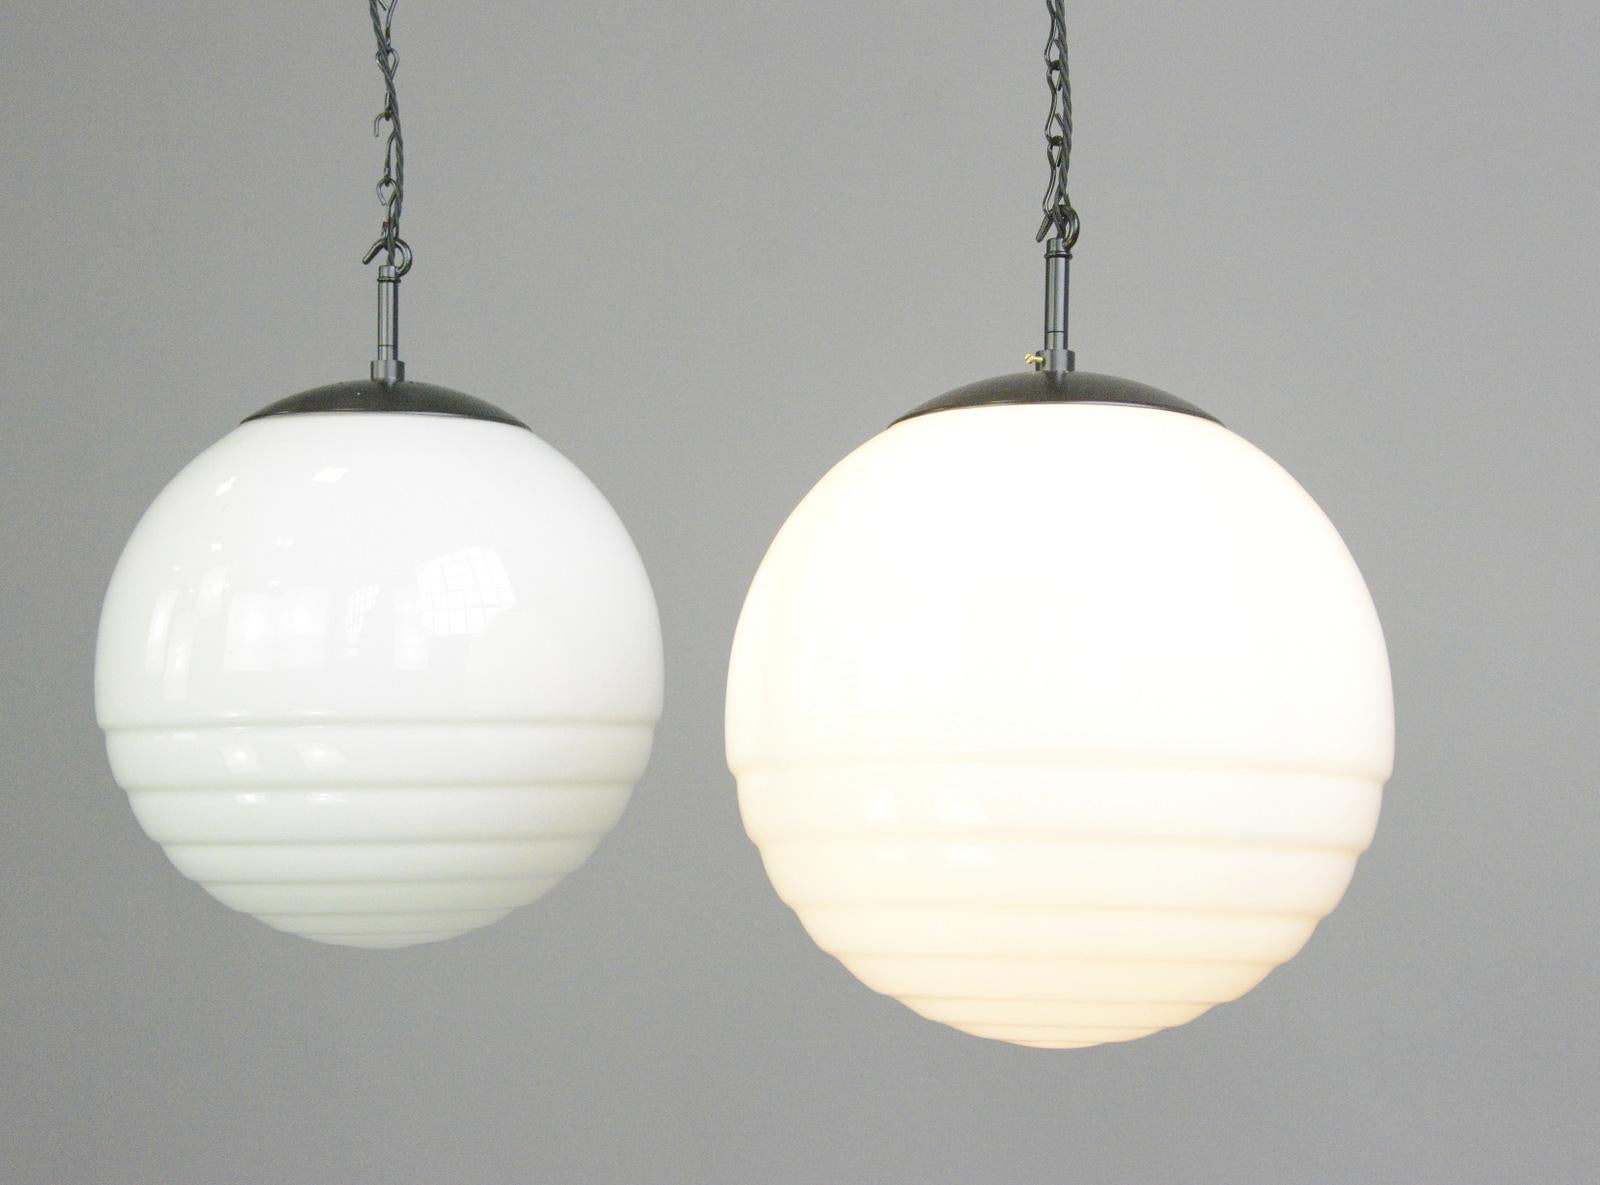 Bauhaus globe light by August Walther and Sohne Circa 1930s

- Stepped opaline glass
- Bakelite galleries and matching ceiling roses
- Comes with 150cm of cable and chain
- Takes E27 fitting bulbs
- Produced by August Walther & Sohne,